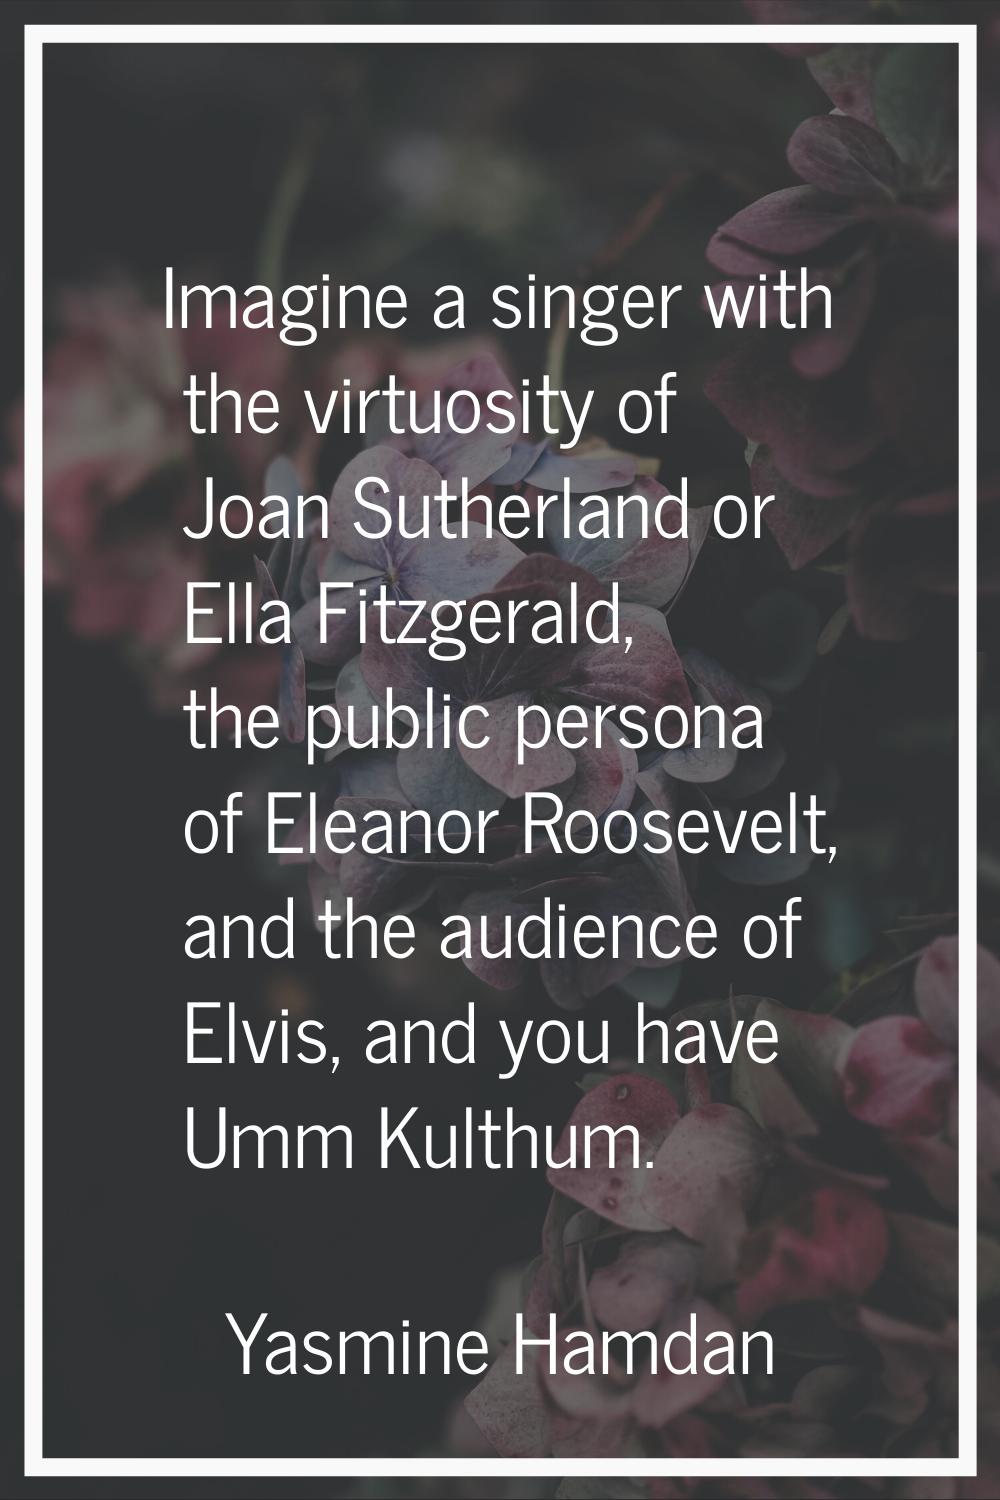 Imagine a singer with the virtuosity of Joan Sutherland or Ella Fitzgerald, the public persona of E